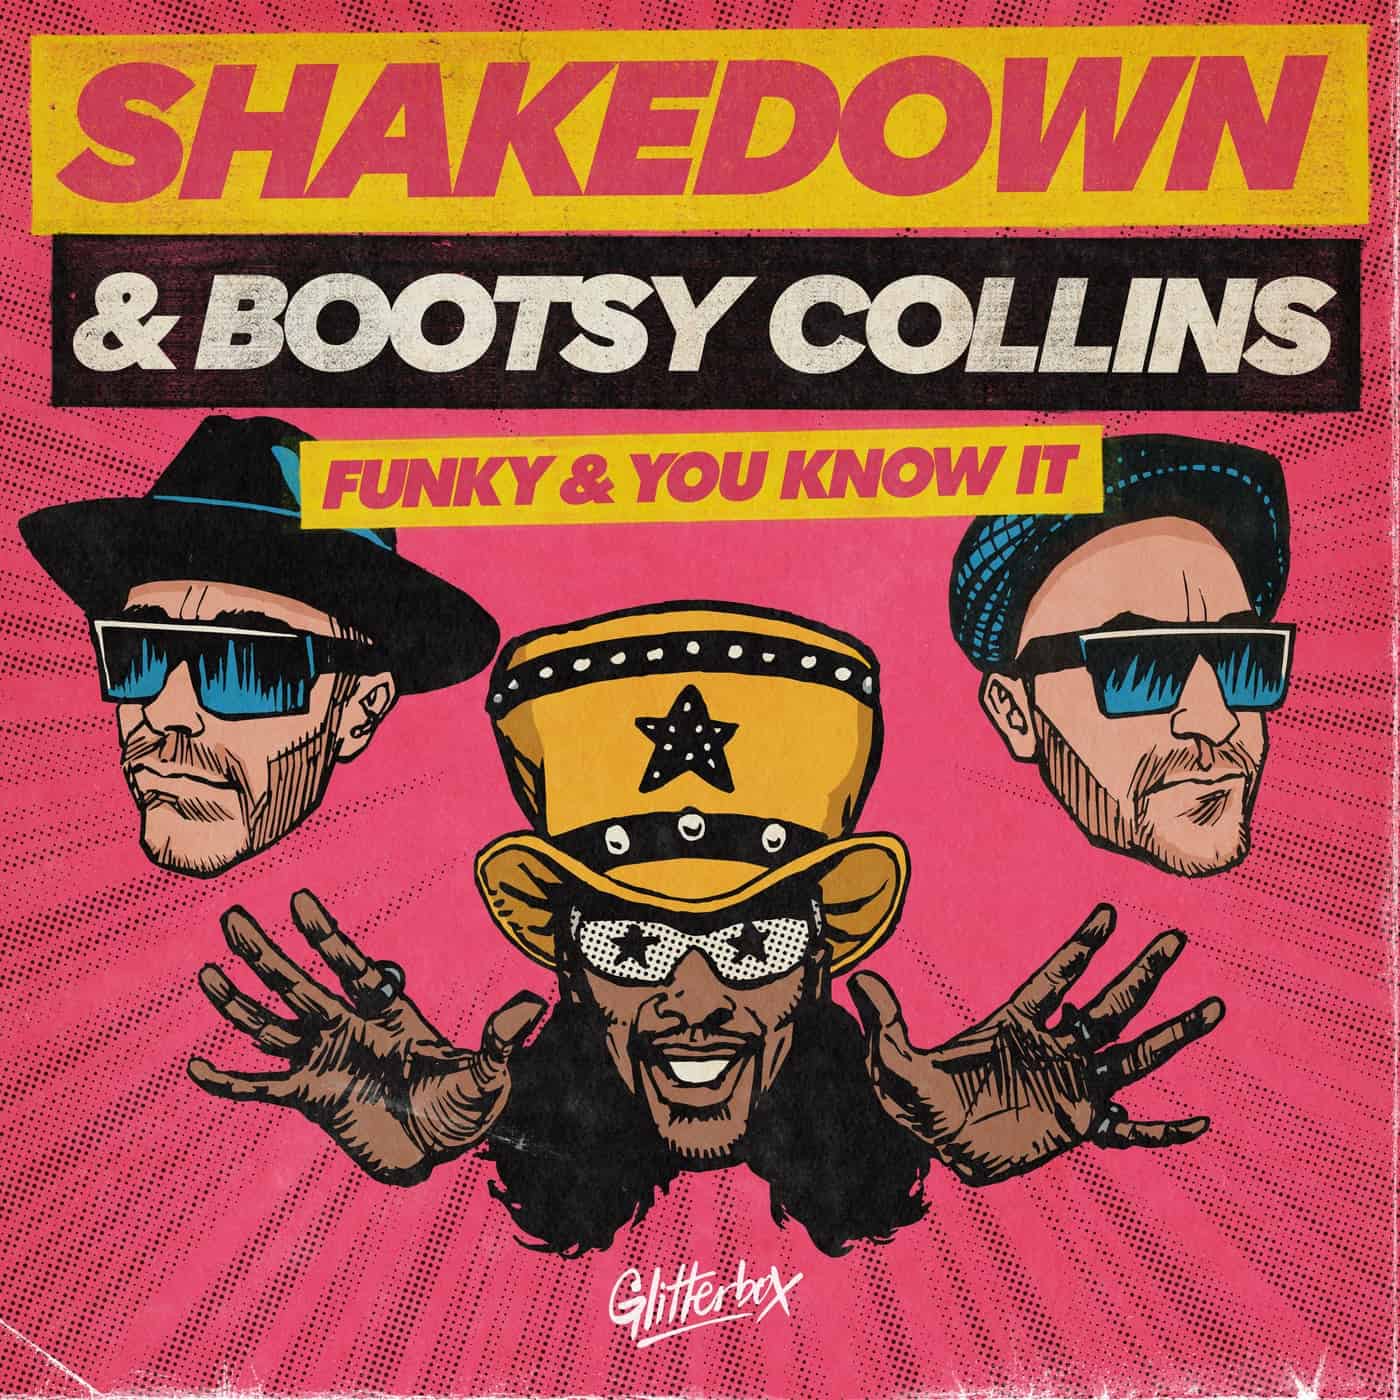 image cover: Funky And You Know It by Shakedown, Bootsy Collins on Glitterbox Recordings